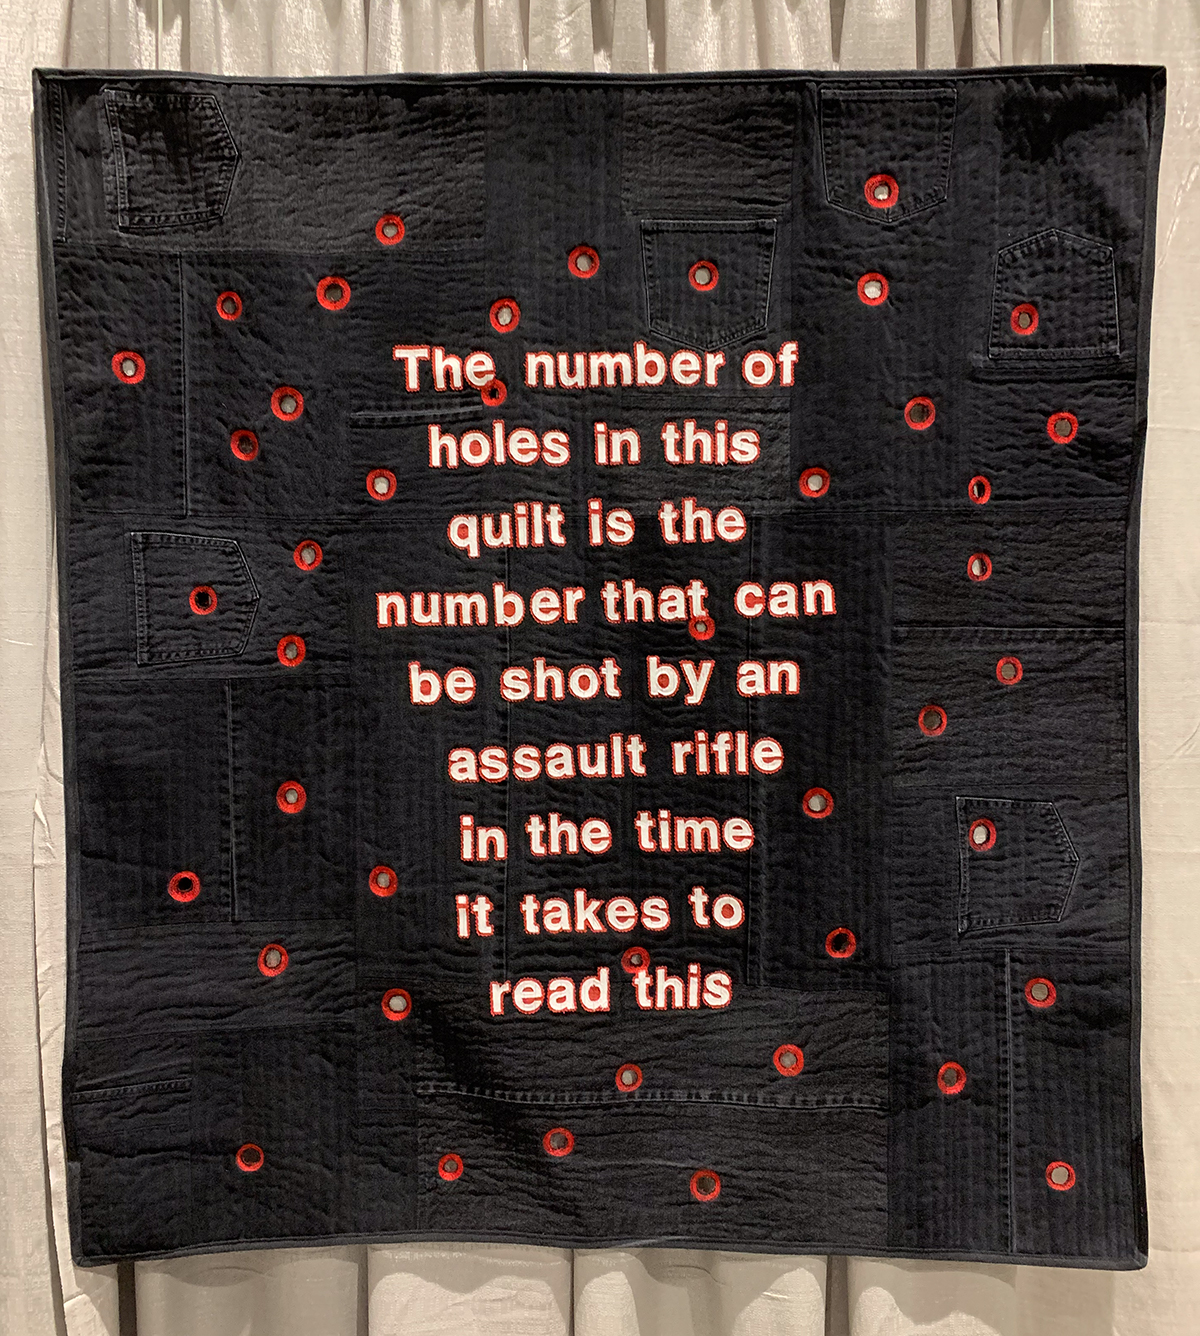 quilt with the words "The number of holes in this quilt is the number that can be shot by an assault riffle in the time it takes to read this."